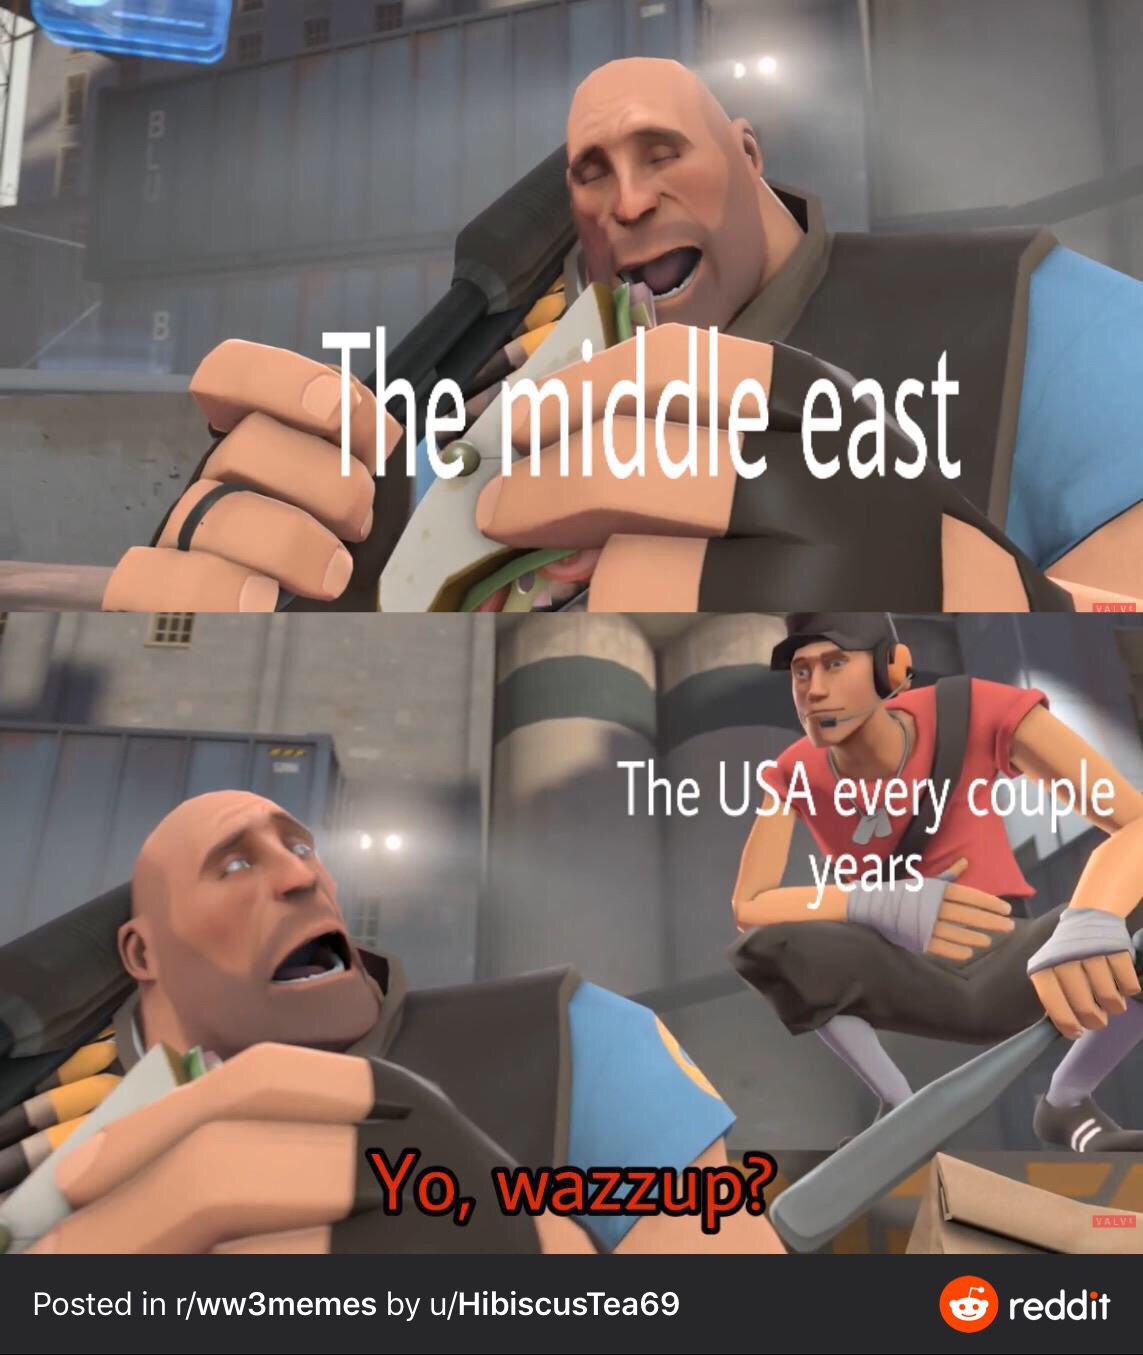 team fortress 2 scout - The middle east The Usa every couple years Yo, Wazzup? Posted in rww3memes by uHibiscusTea69 reddit